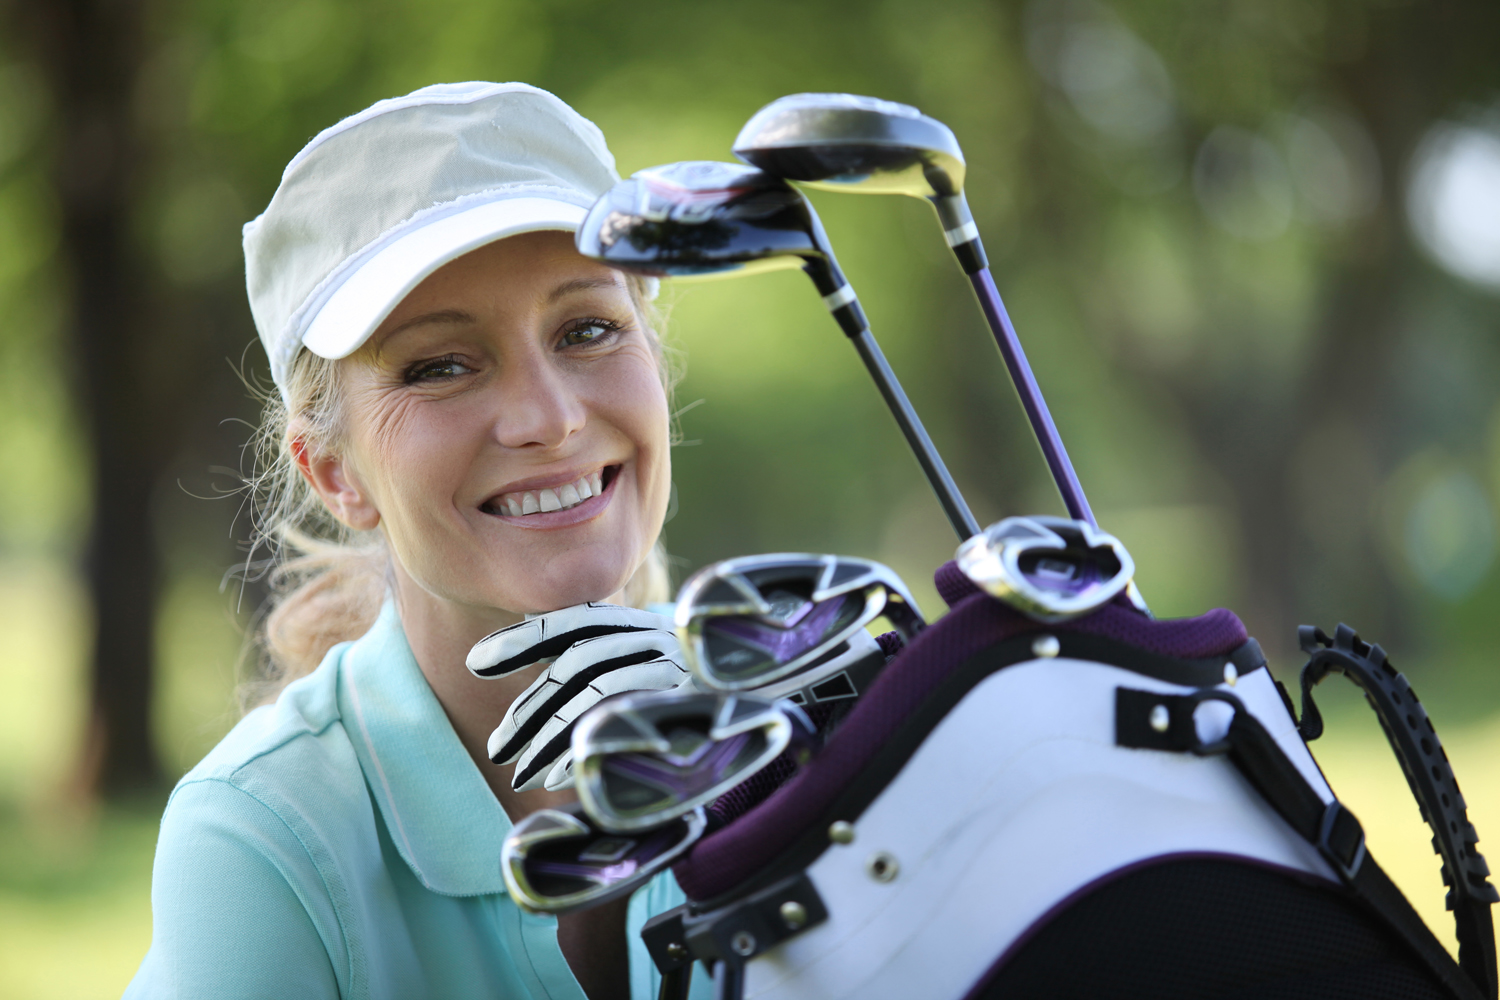 woman with a bag full of golf clubs